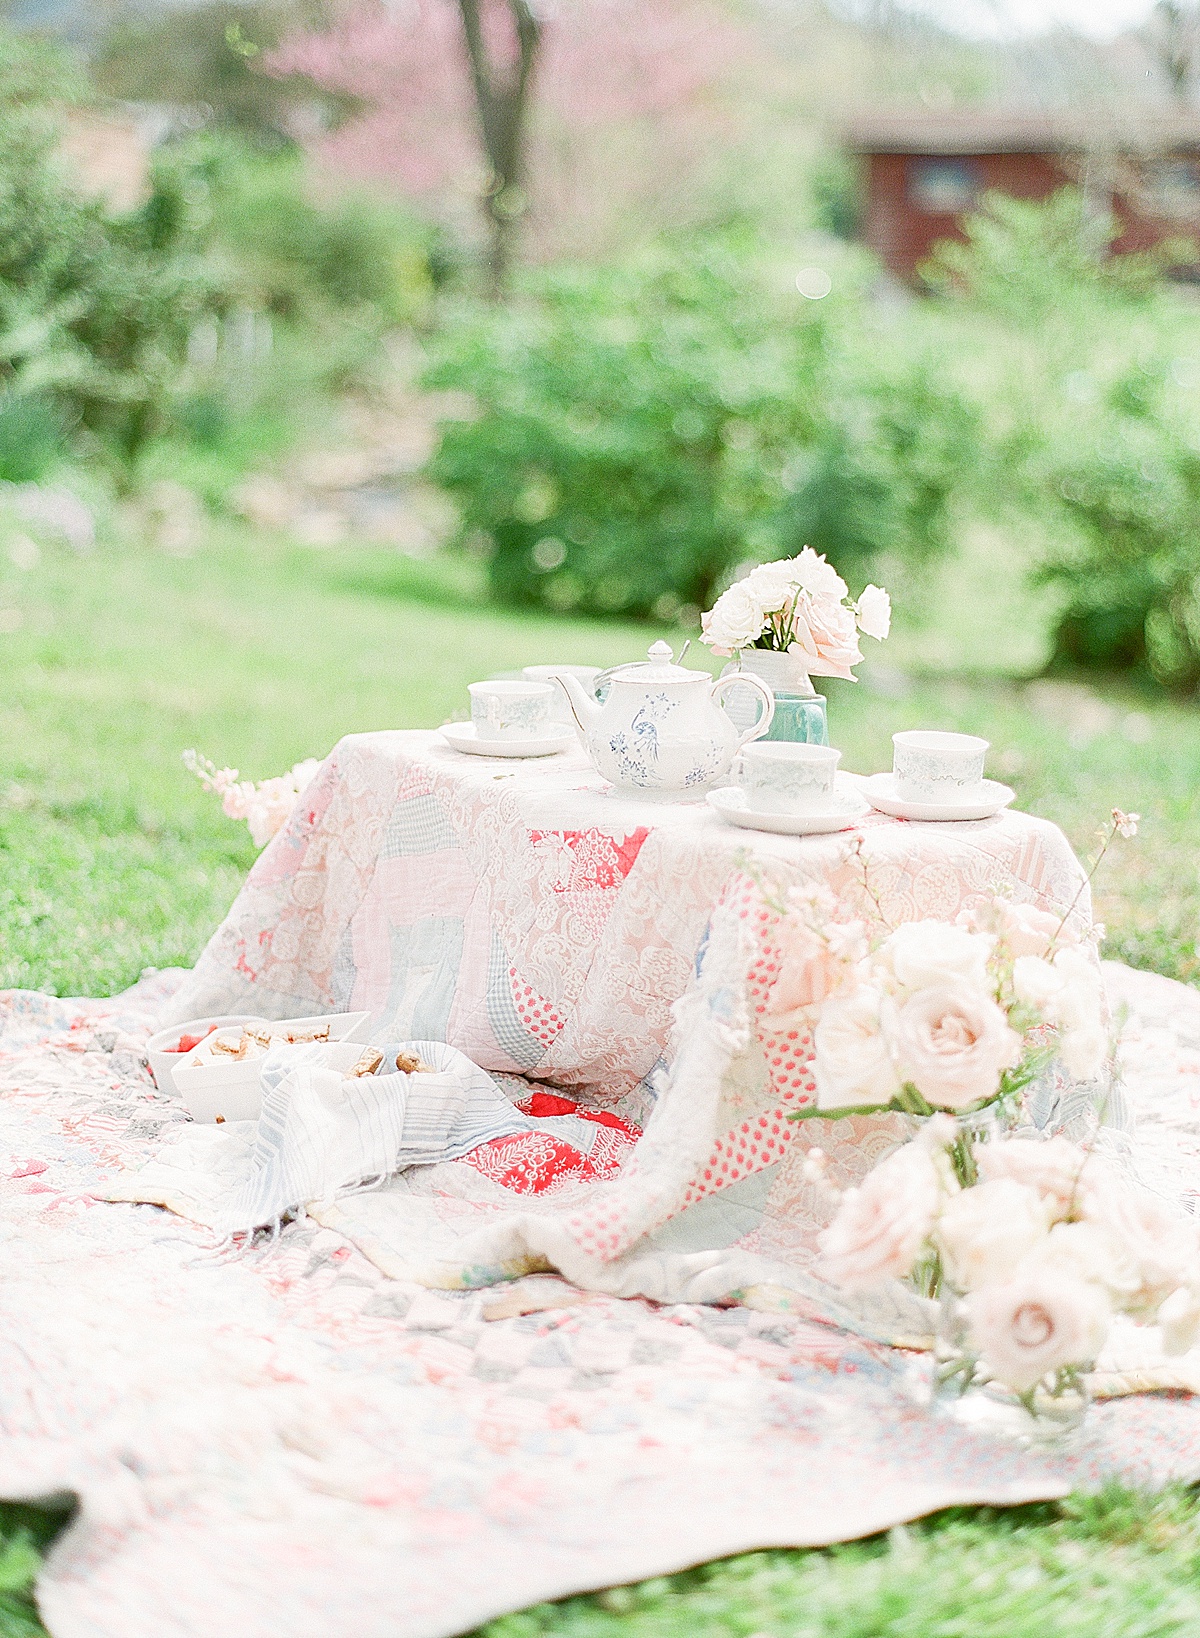 Tea Party Table On the Ground With Quilts and Flowers Photo